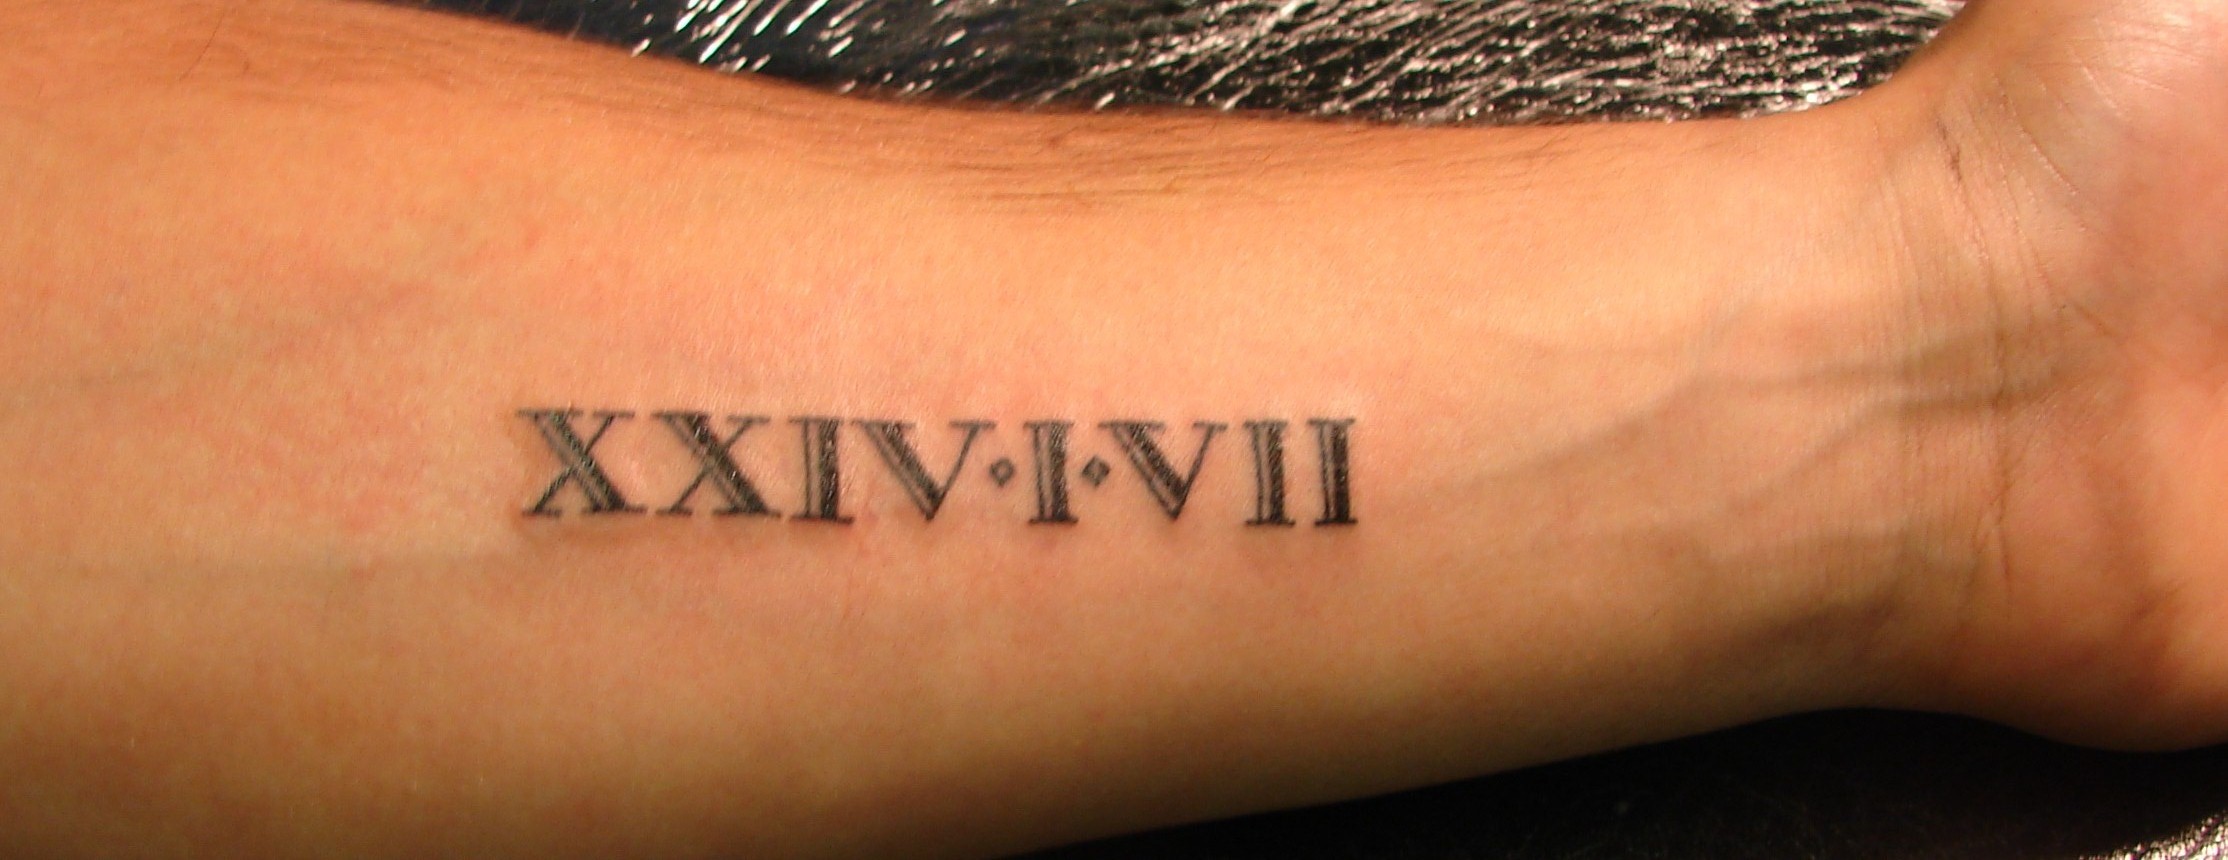 4. Creative Romans 12:2 Tattoo Placement - wide 8